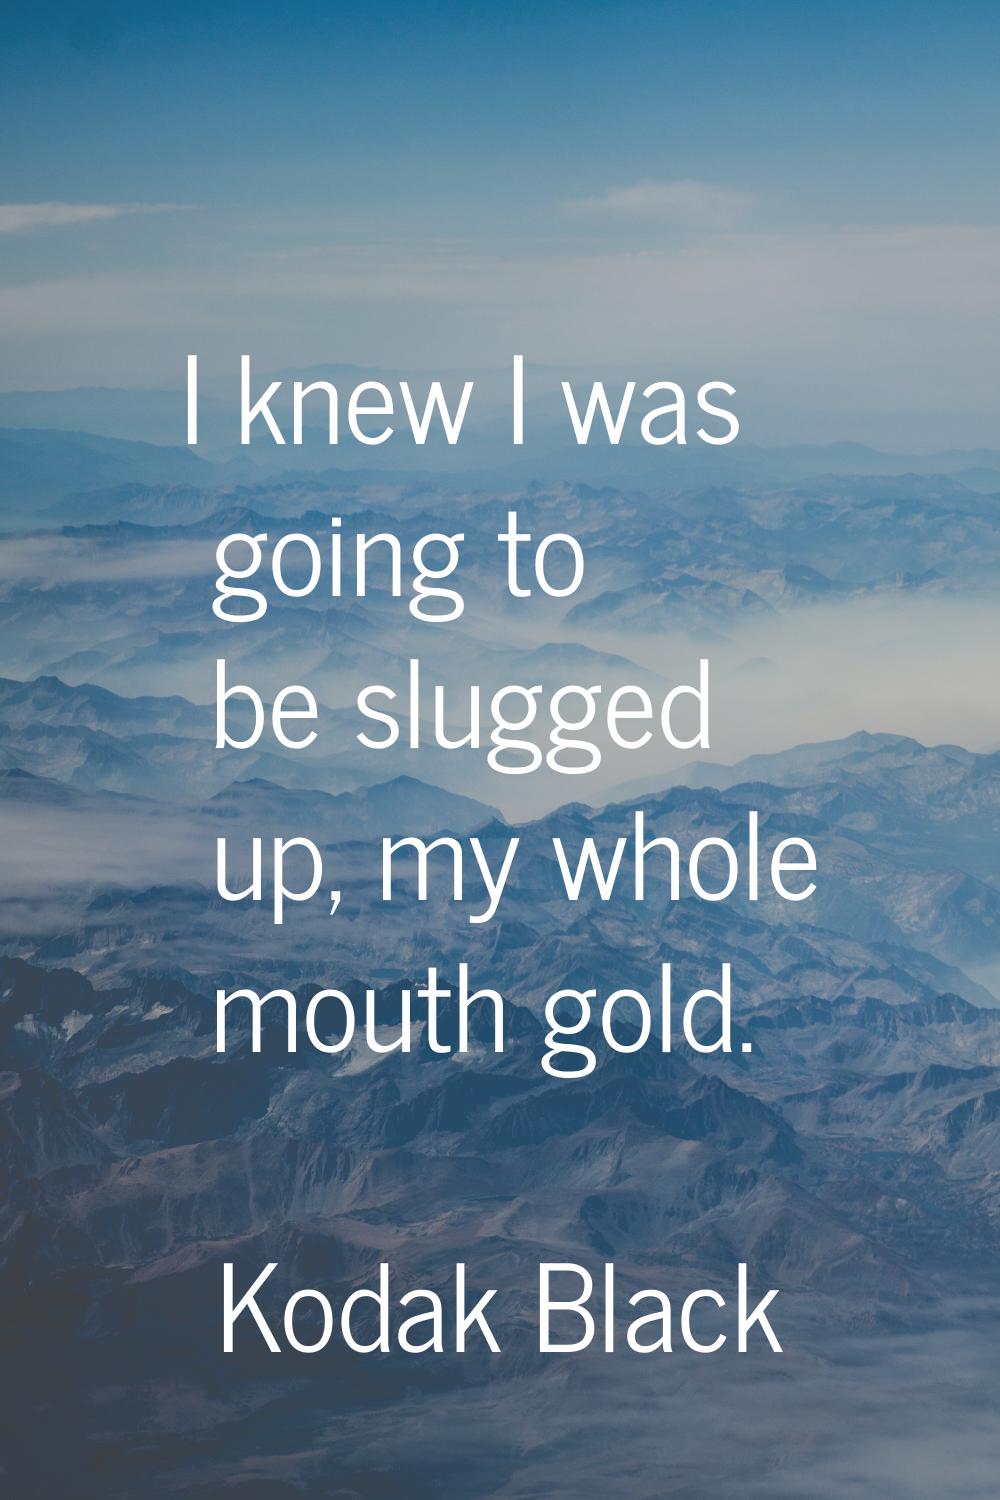 I knew I was going to be slugged up, my whole mouth gold.